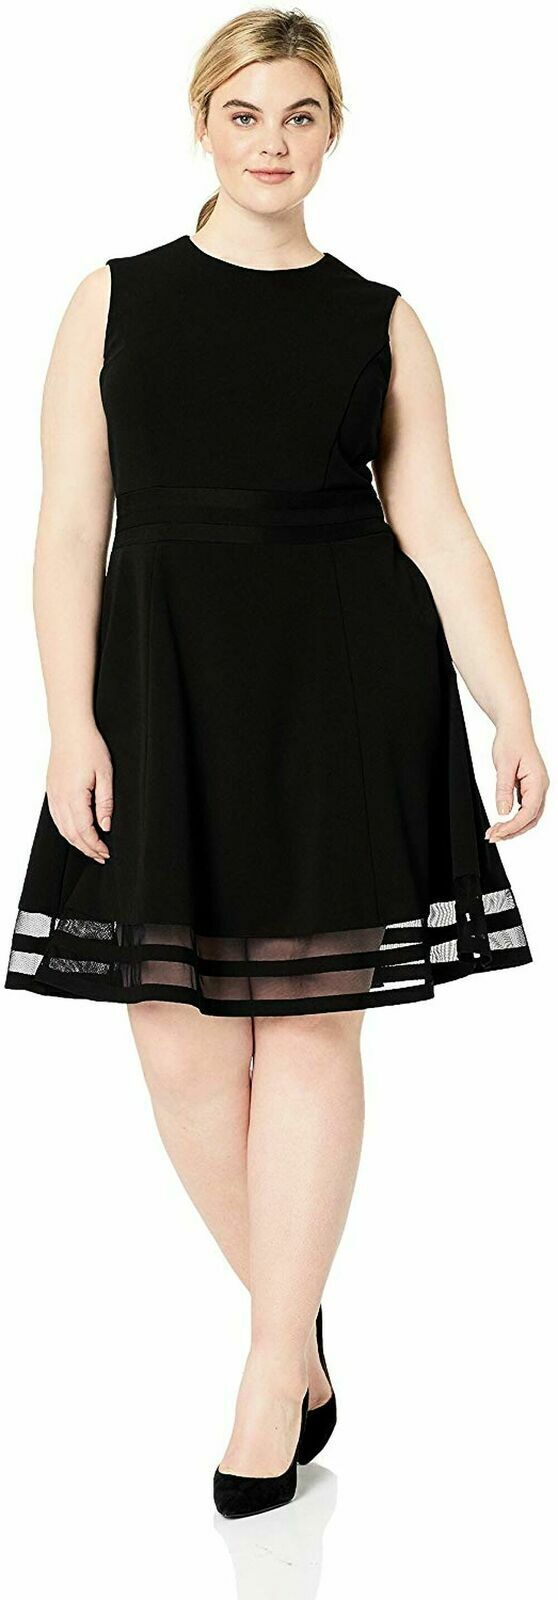 Calvin Klein Fit and Flare Dress w/Sheer Inserts sizes 14,16,18,  (B269) | eBay